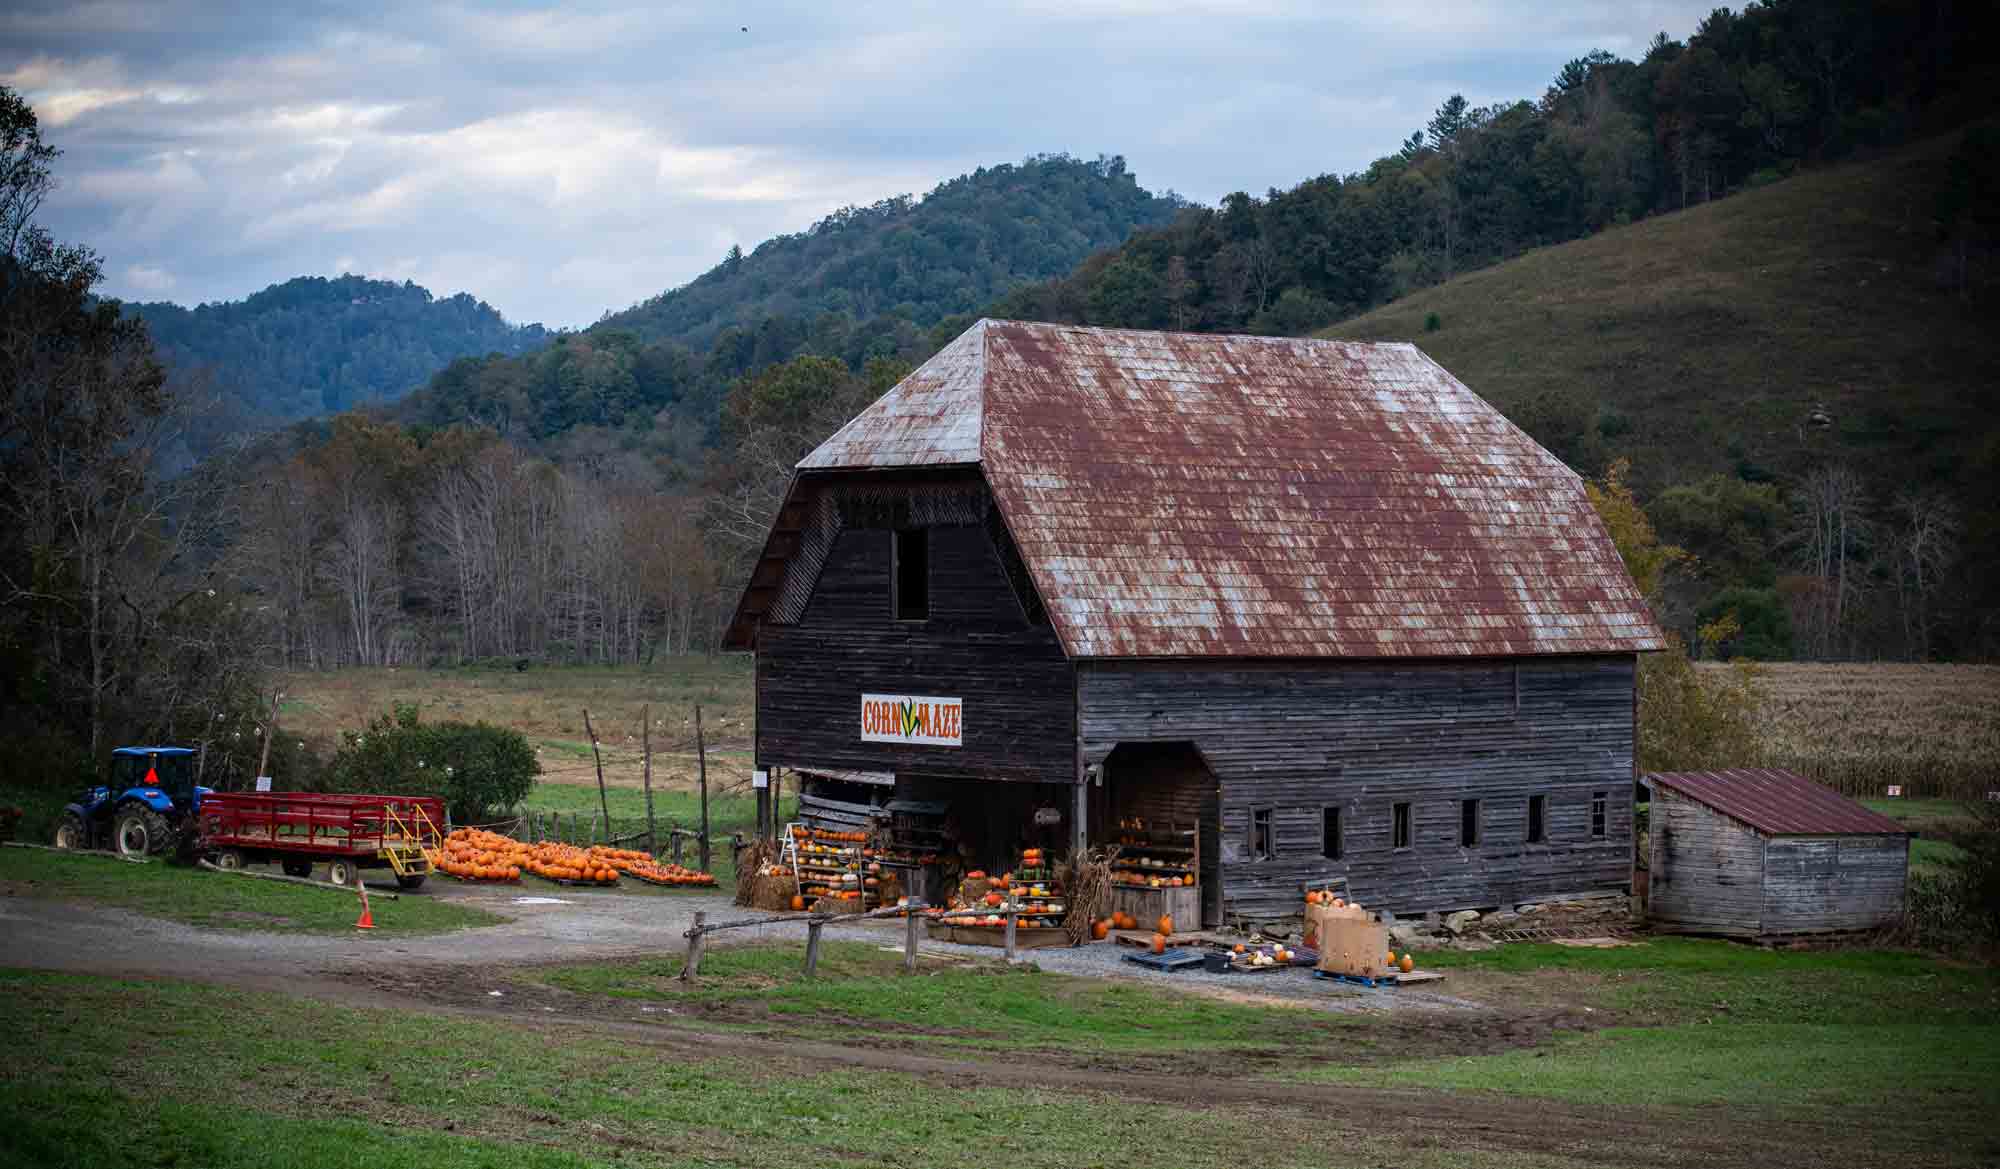 A fall day at Harvest Farms pumpkin patch in Valle Crucis.